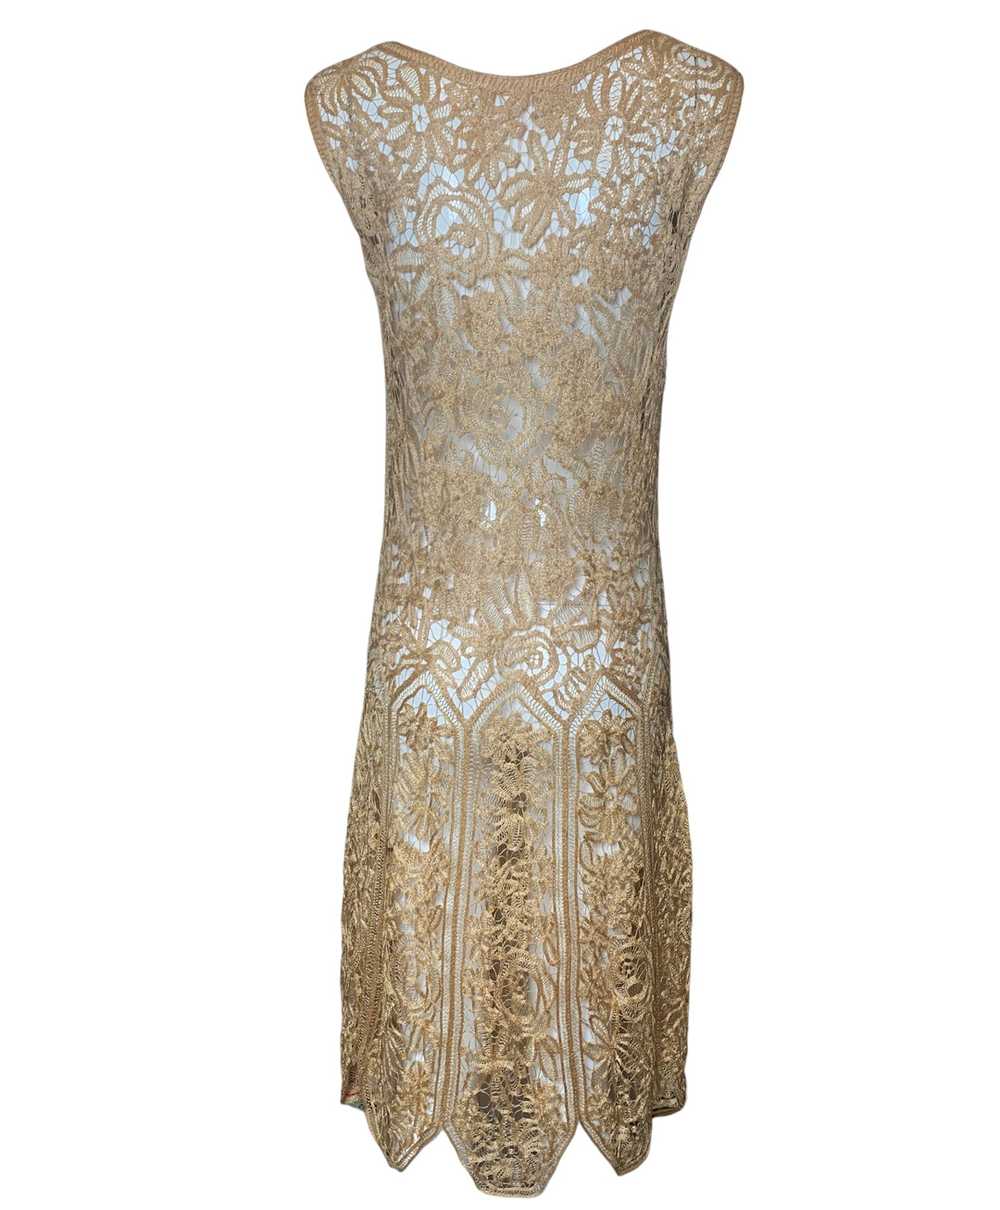 20s Handmade Nude Lace Crochet Day Dress with Sca… - image 3